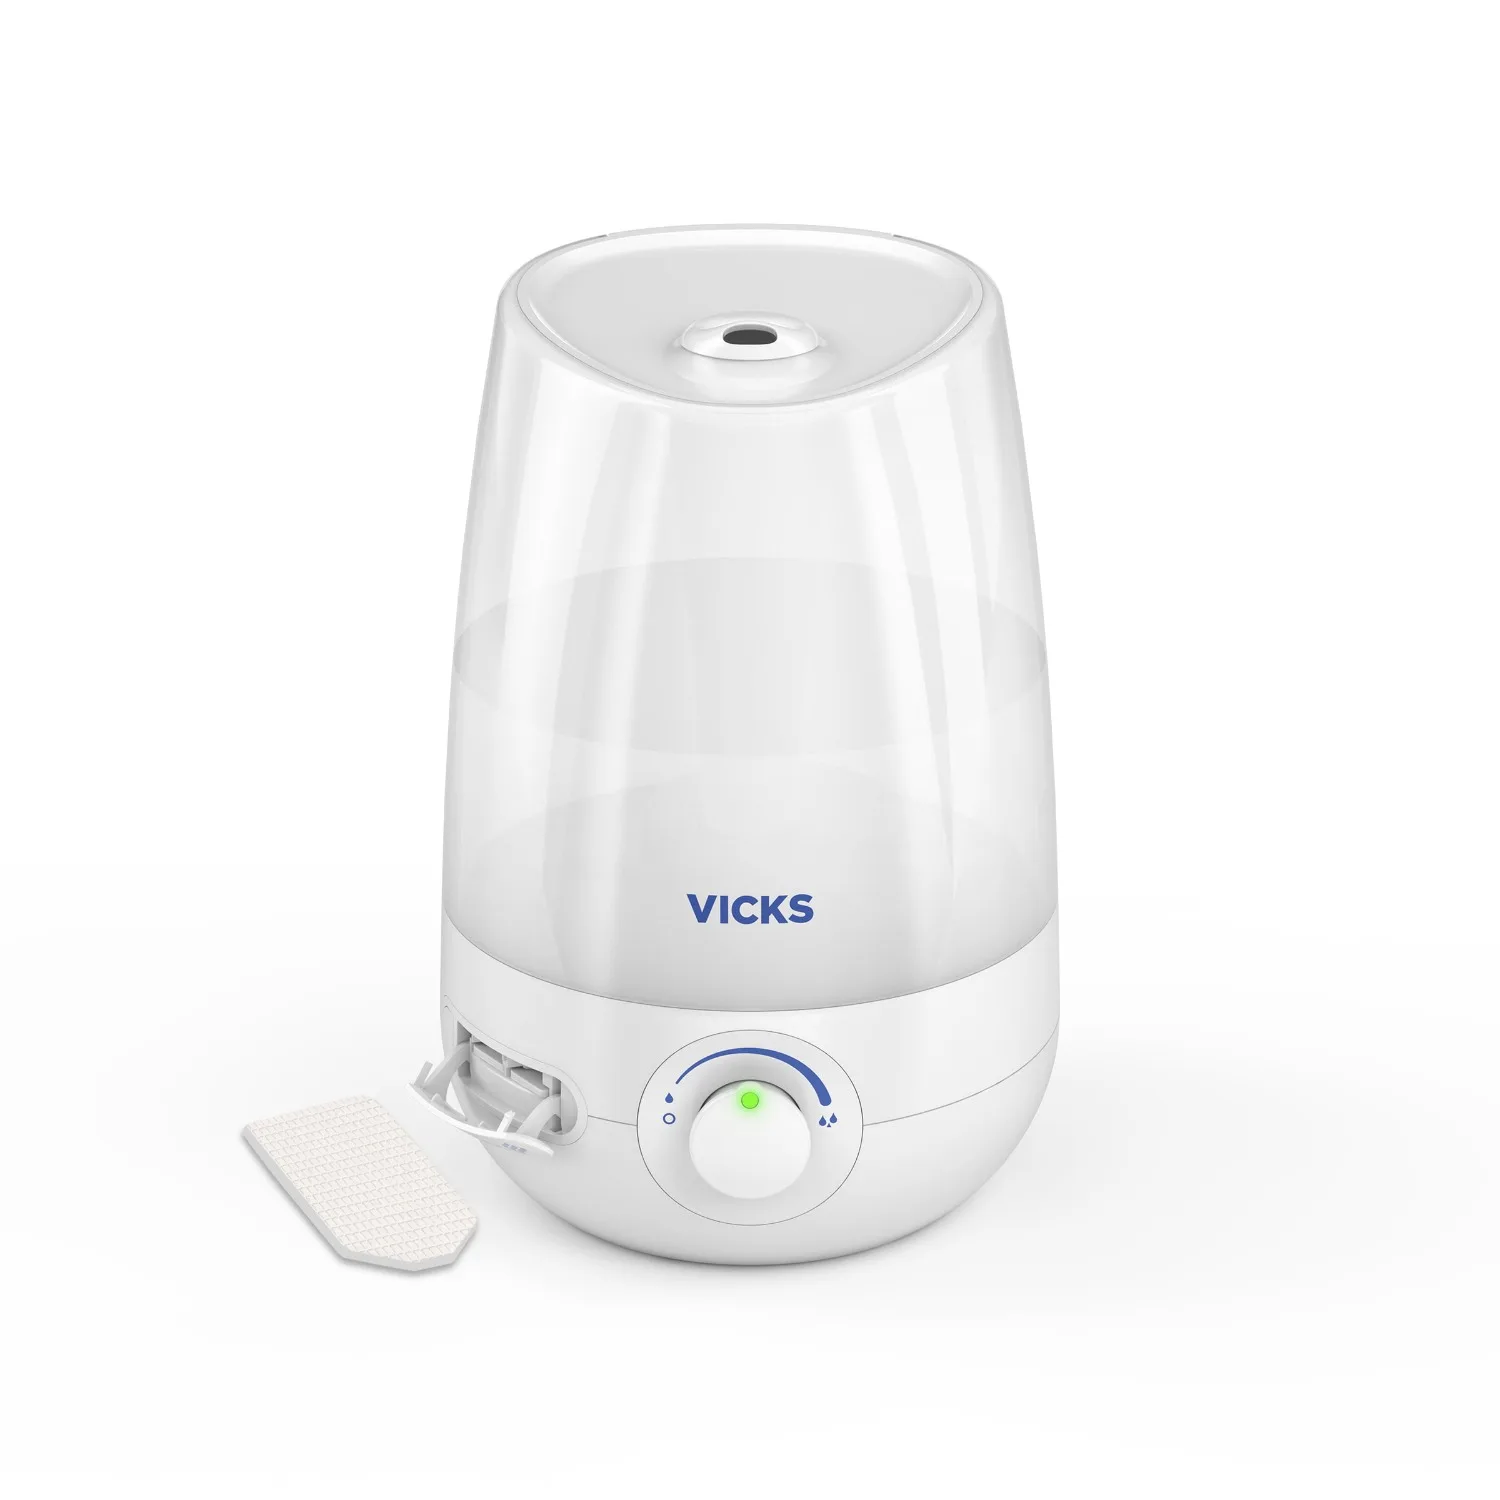 

Portable Humidifier For Home 1 Gallon Filter Free Cool Mist Ultrasonic Humidifier, VUL545, White diffuser